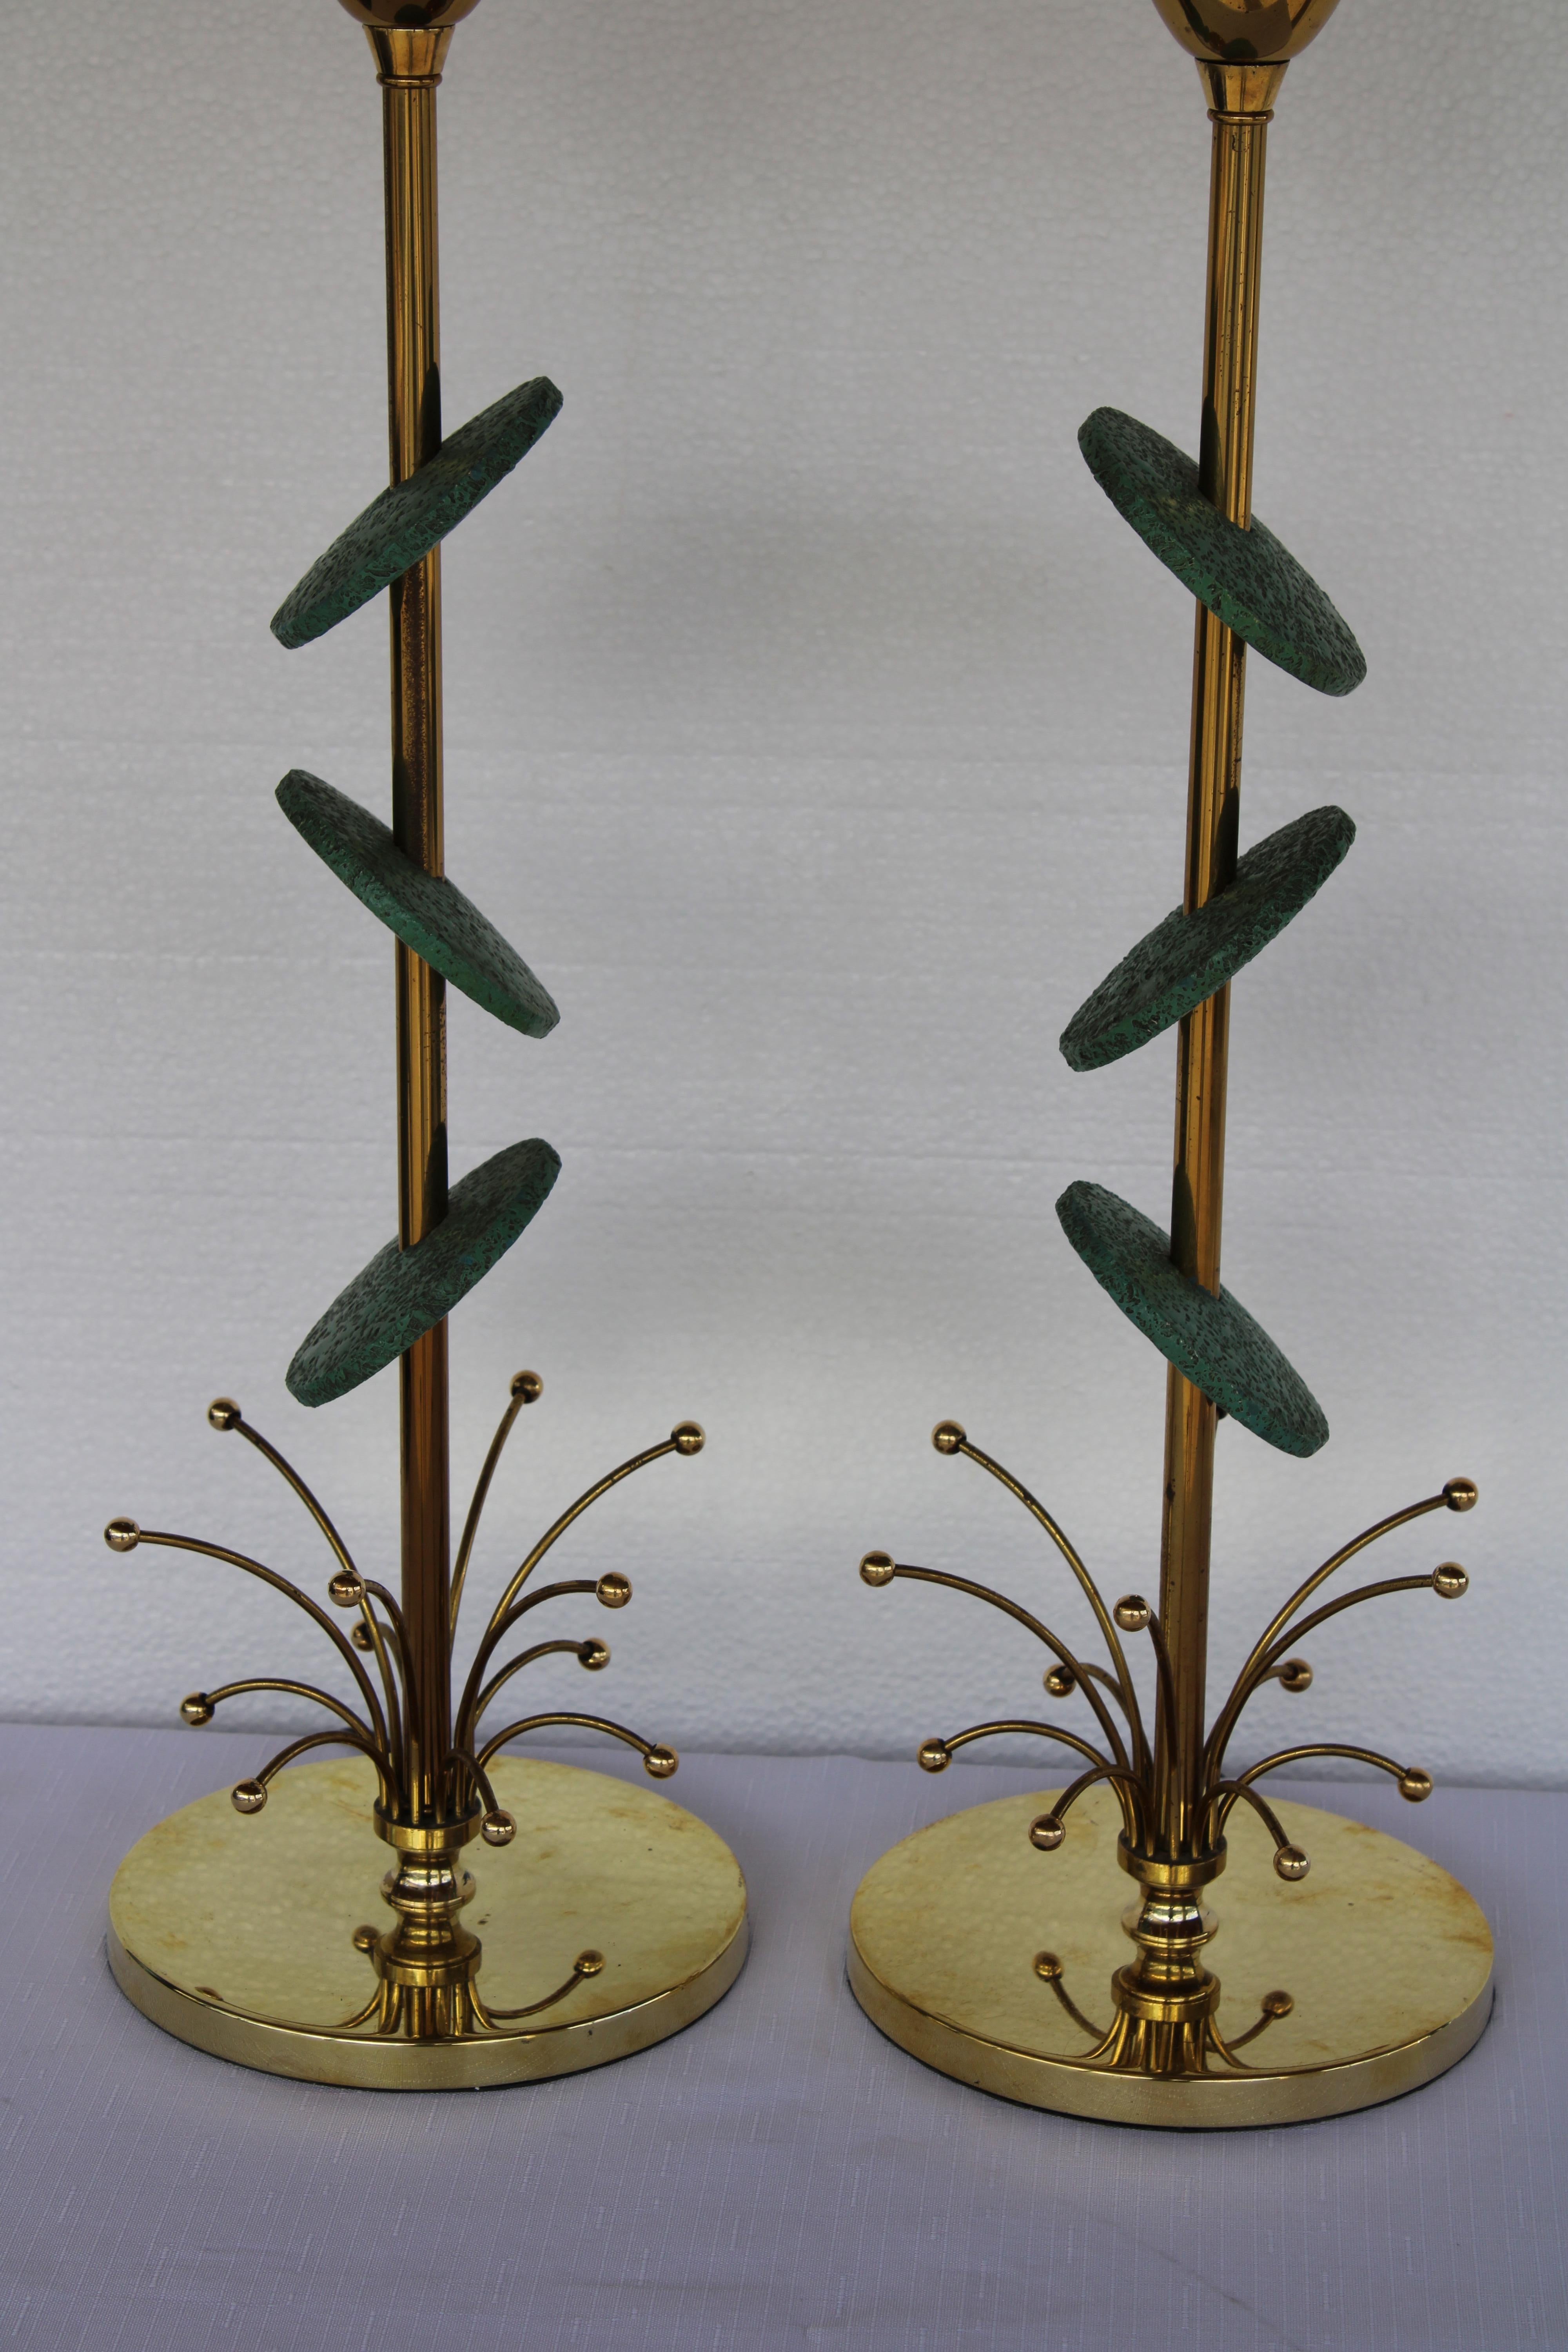 Pair of lamps by the Rembrandt lamp company, each with 3 green ceramic disks.  Each lamp measures 27.5